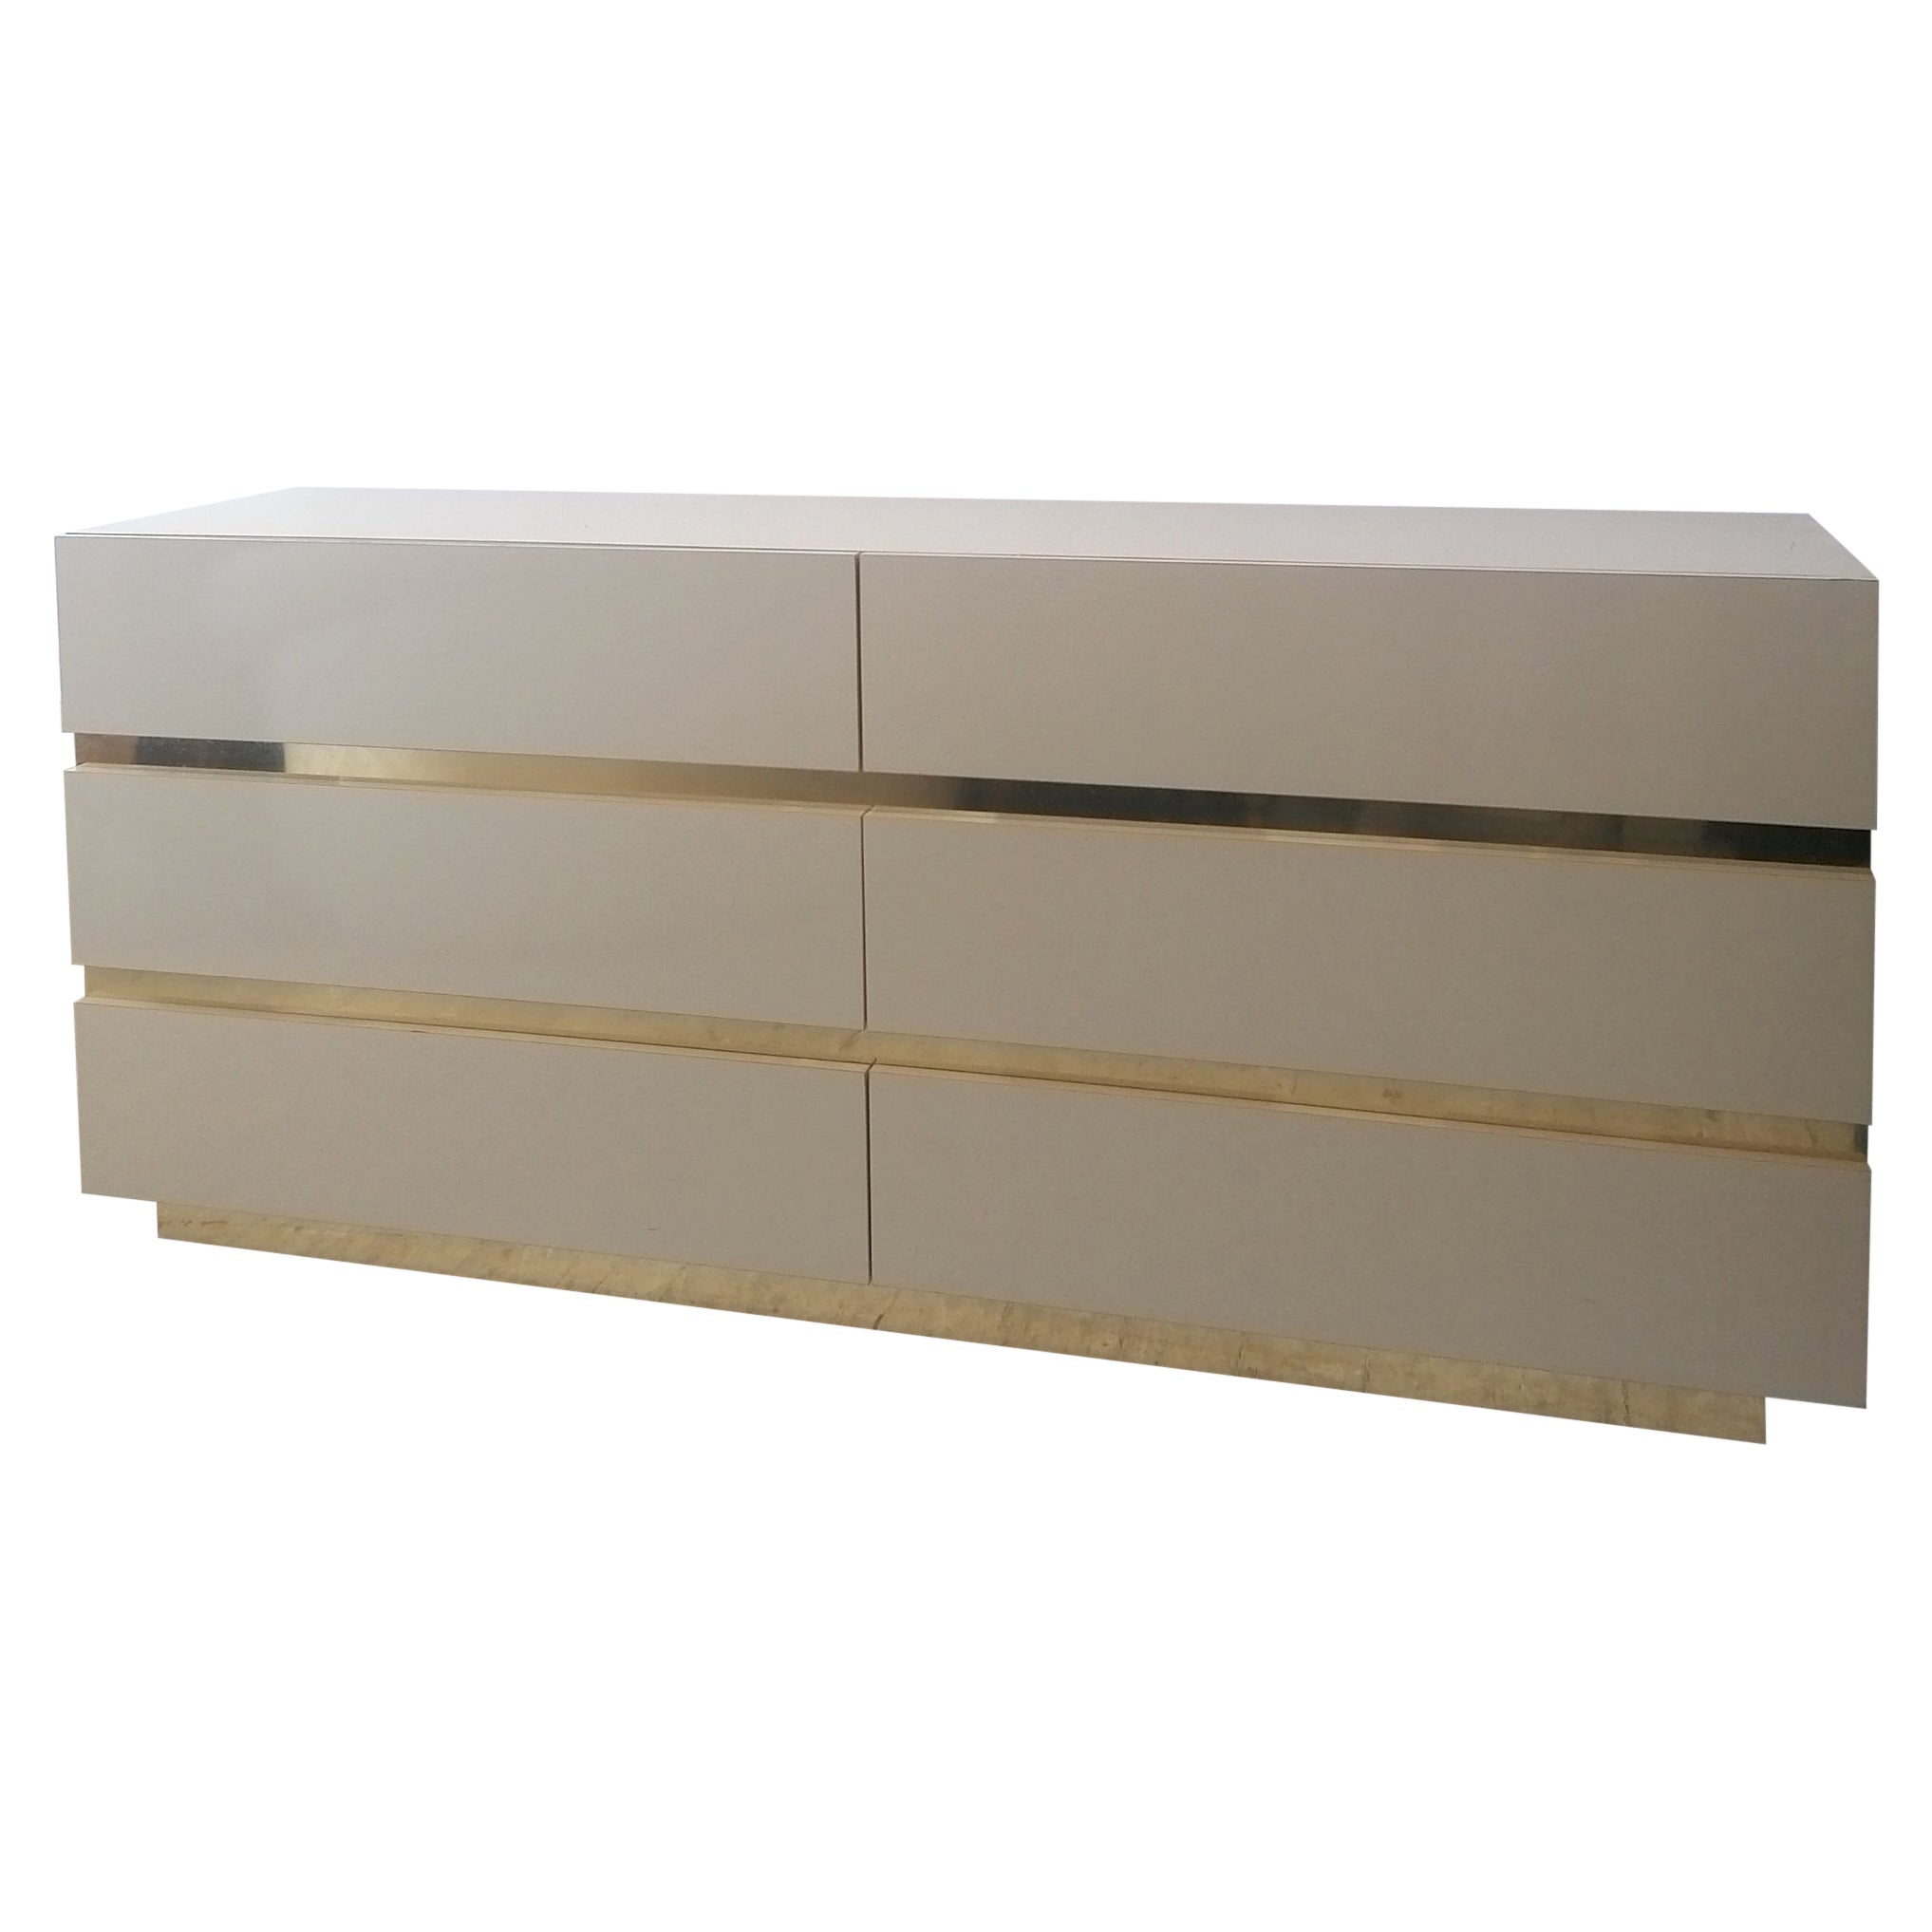 1980s American cream & gold metal sideboard / dresser with drawers